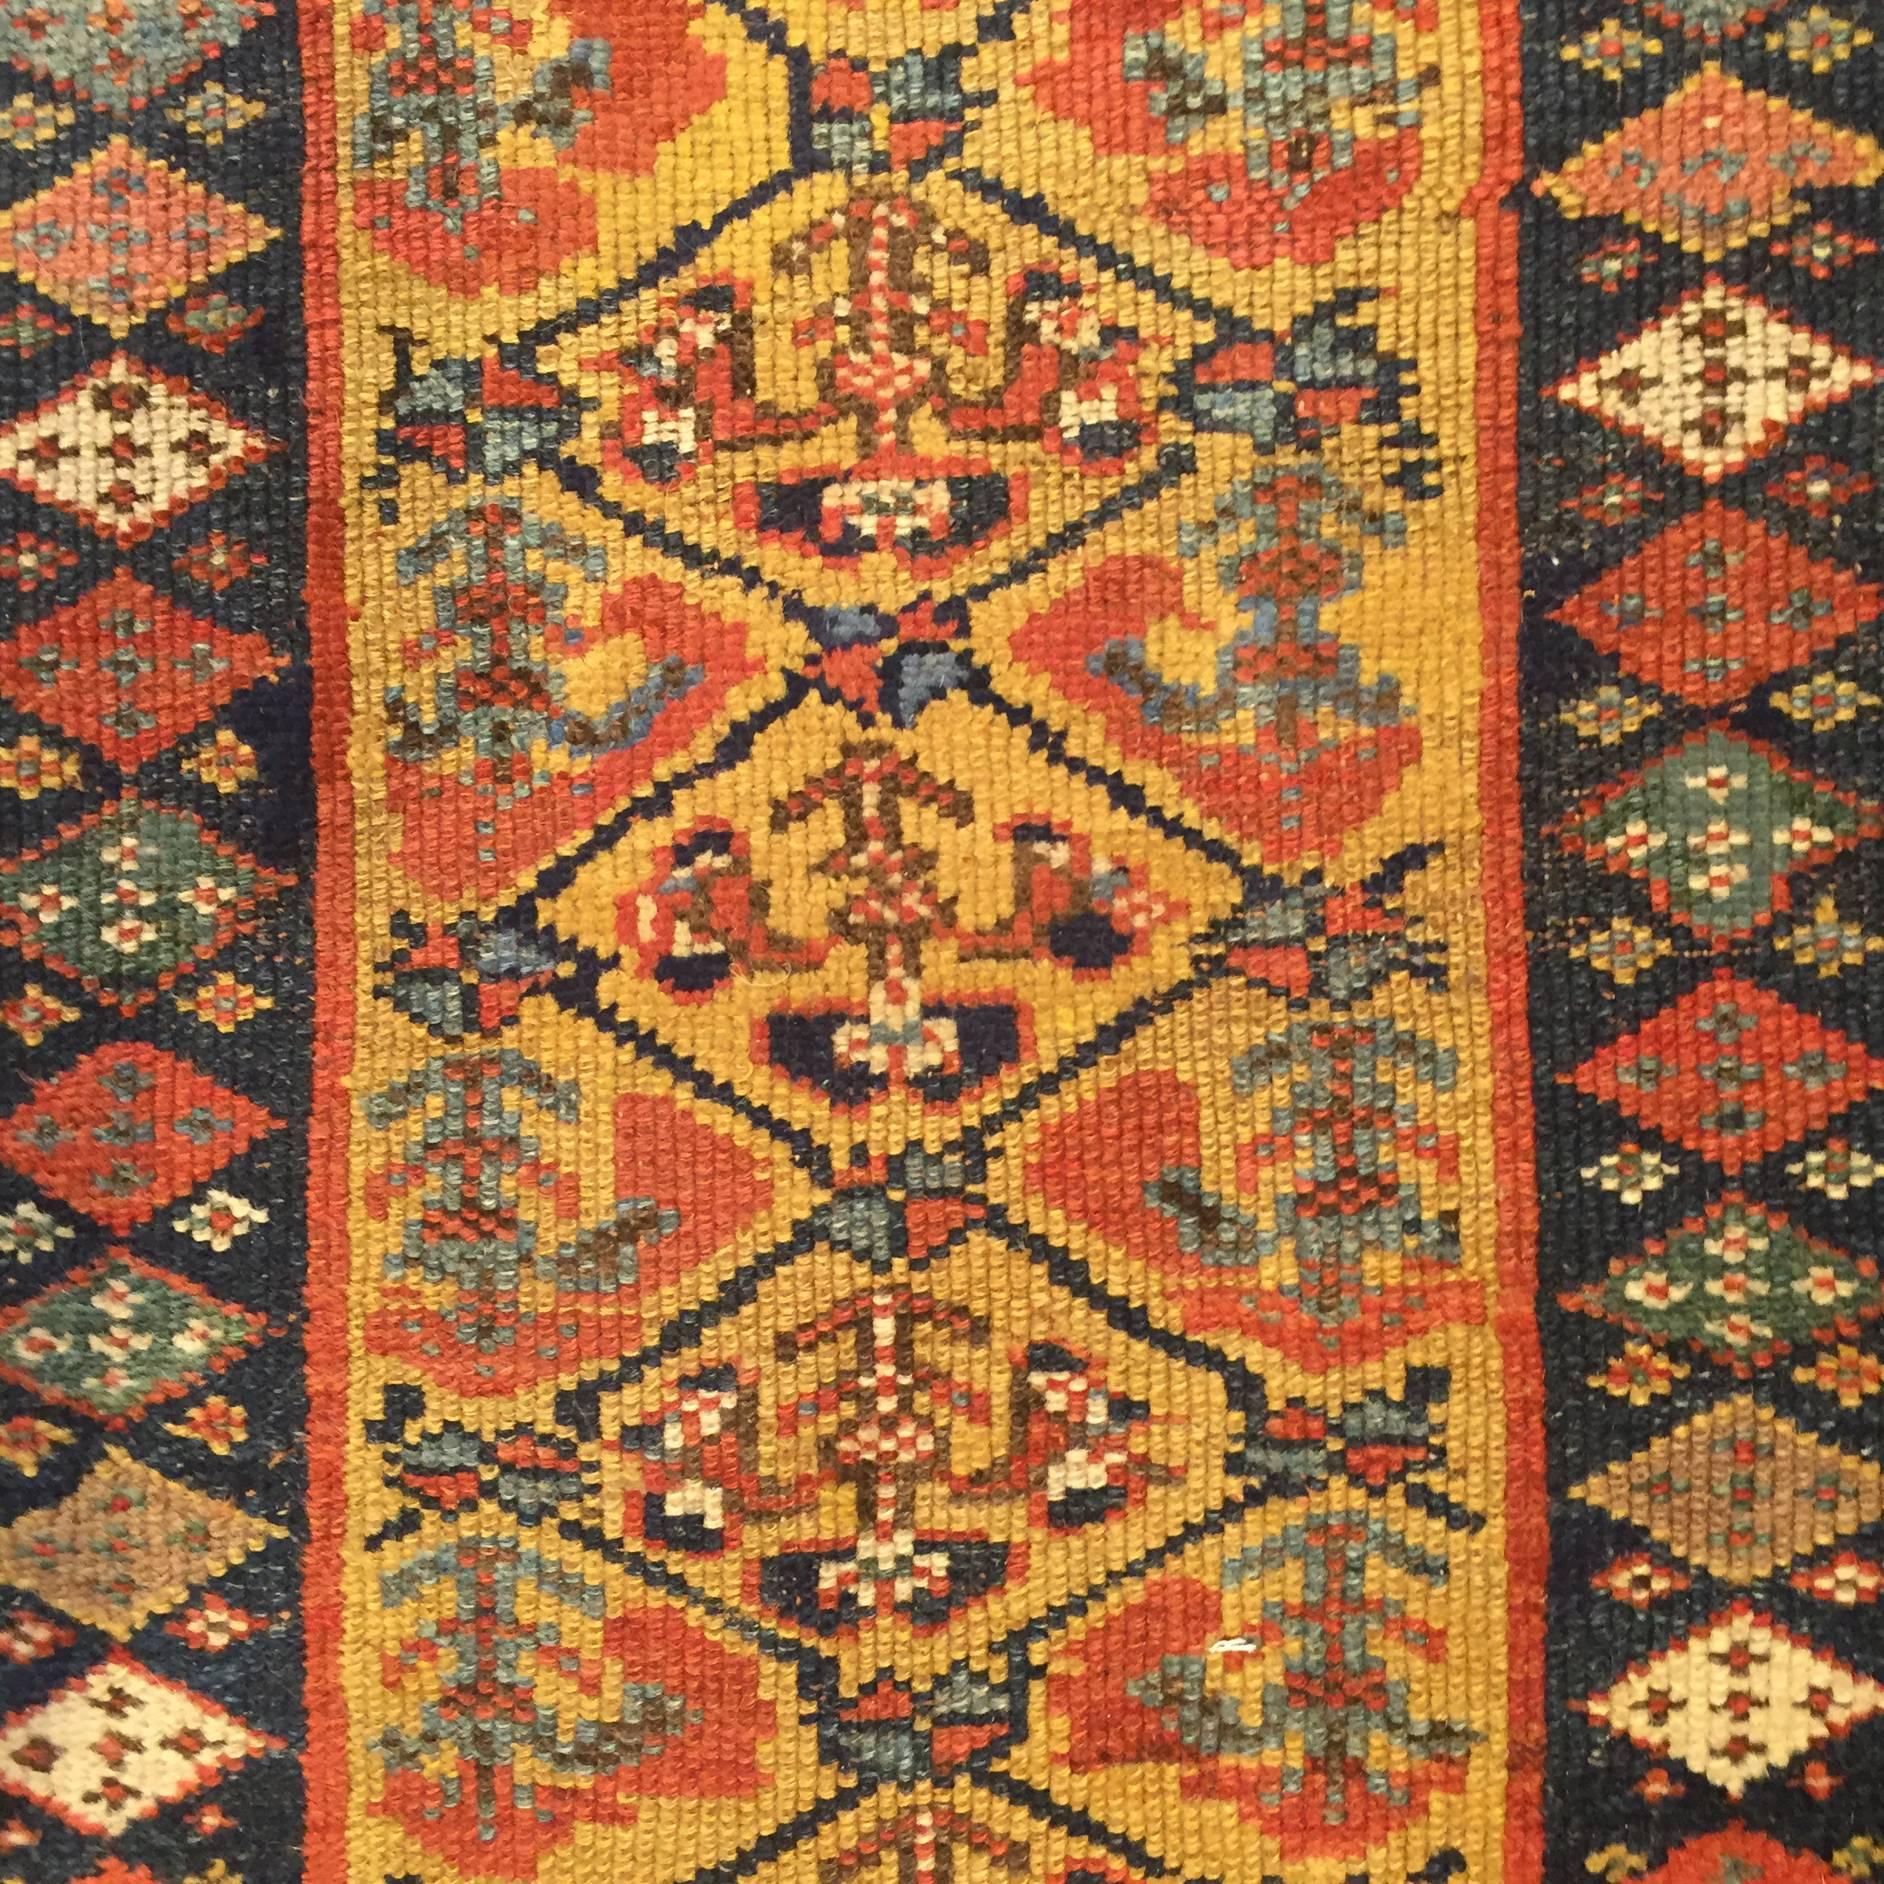 A wonderful late 19th century Persian Kurdish runner woven with wonderful natural vegetable dyed maize, crimson, and indigo dyes in an all-over tree-of-life diamond pattern surrounded by multiple intricately woven contrasting diamond and geometric